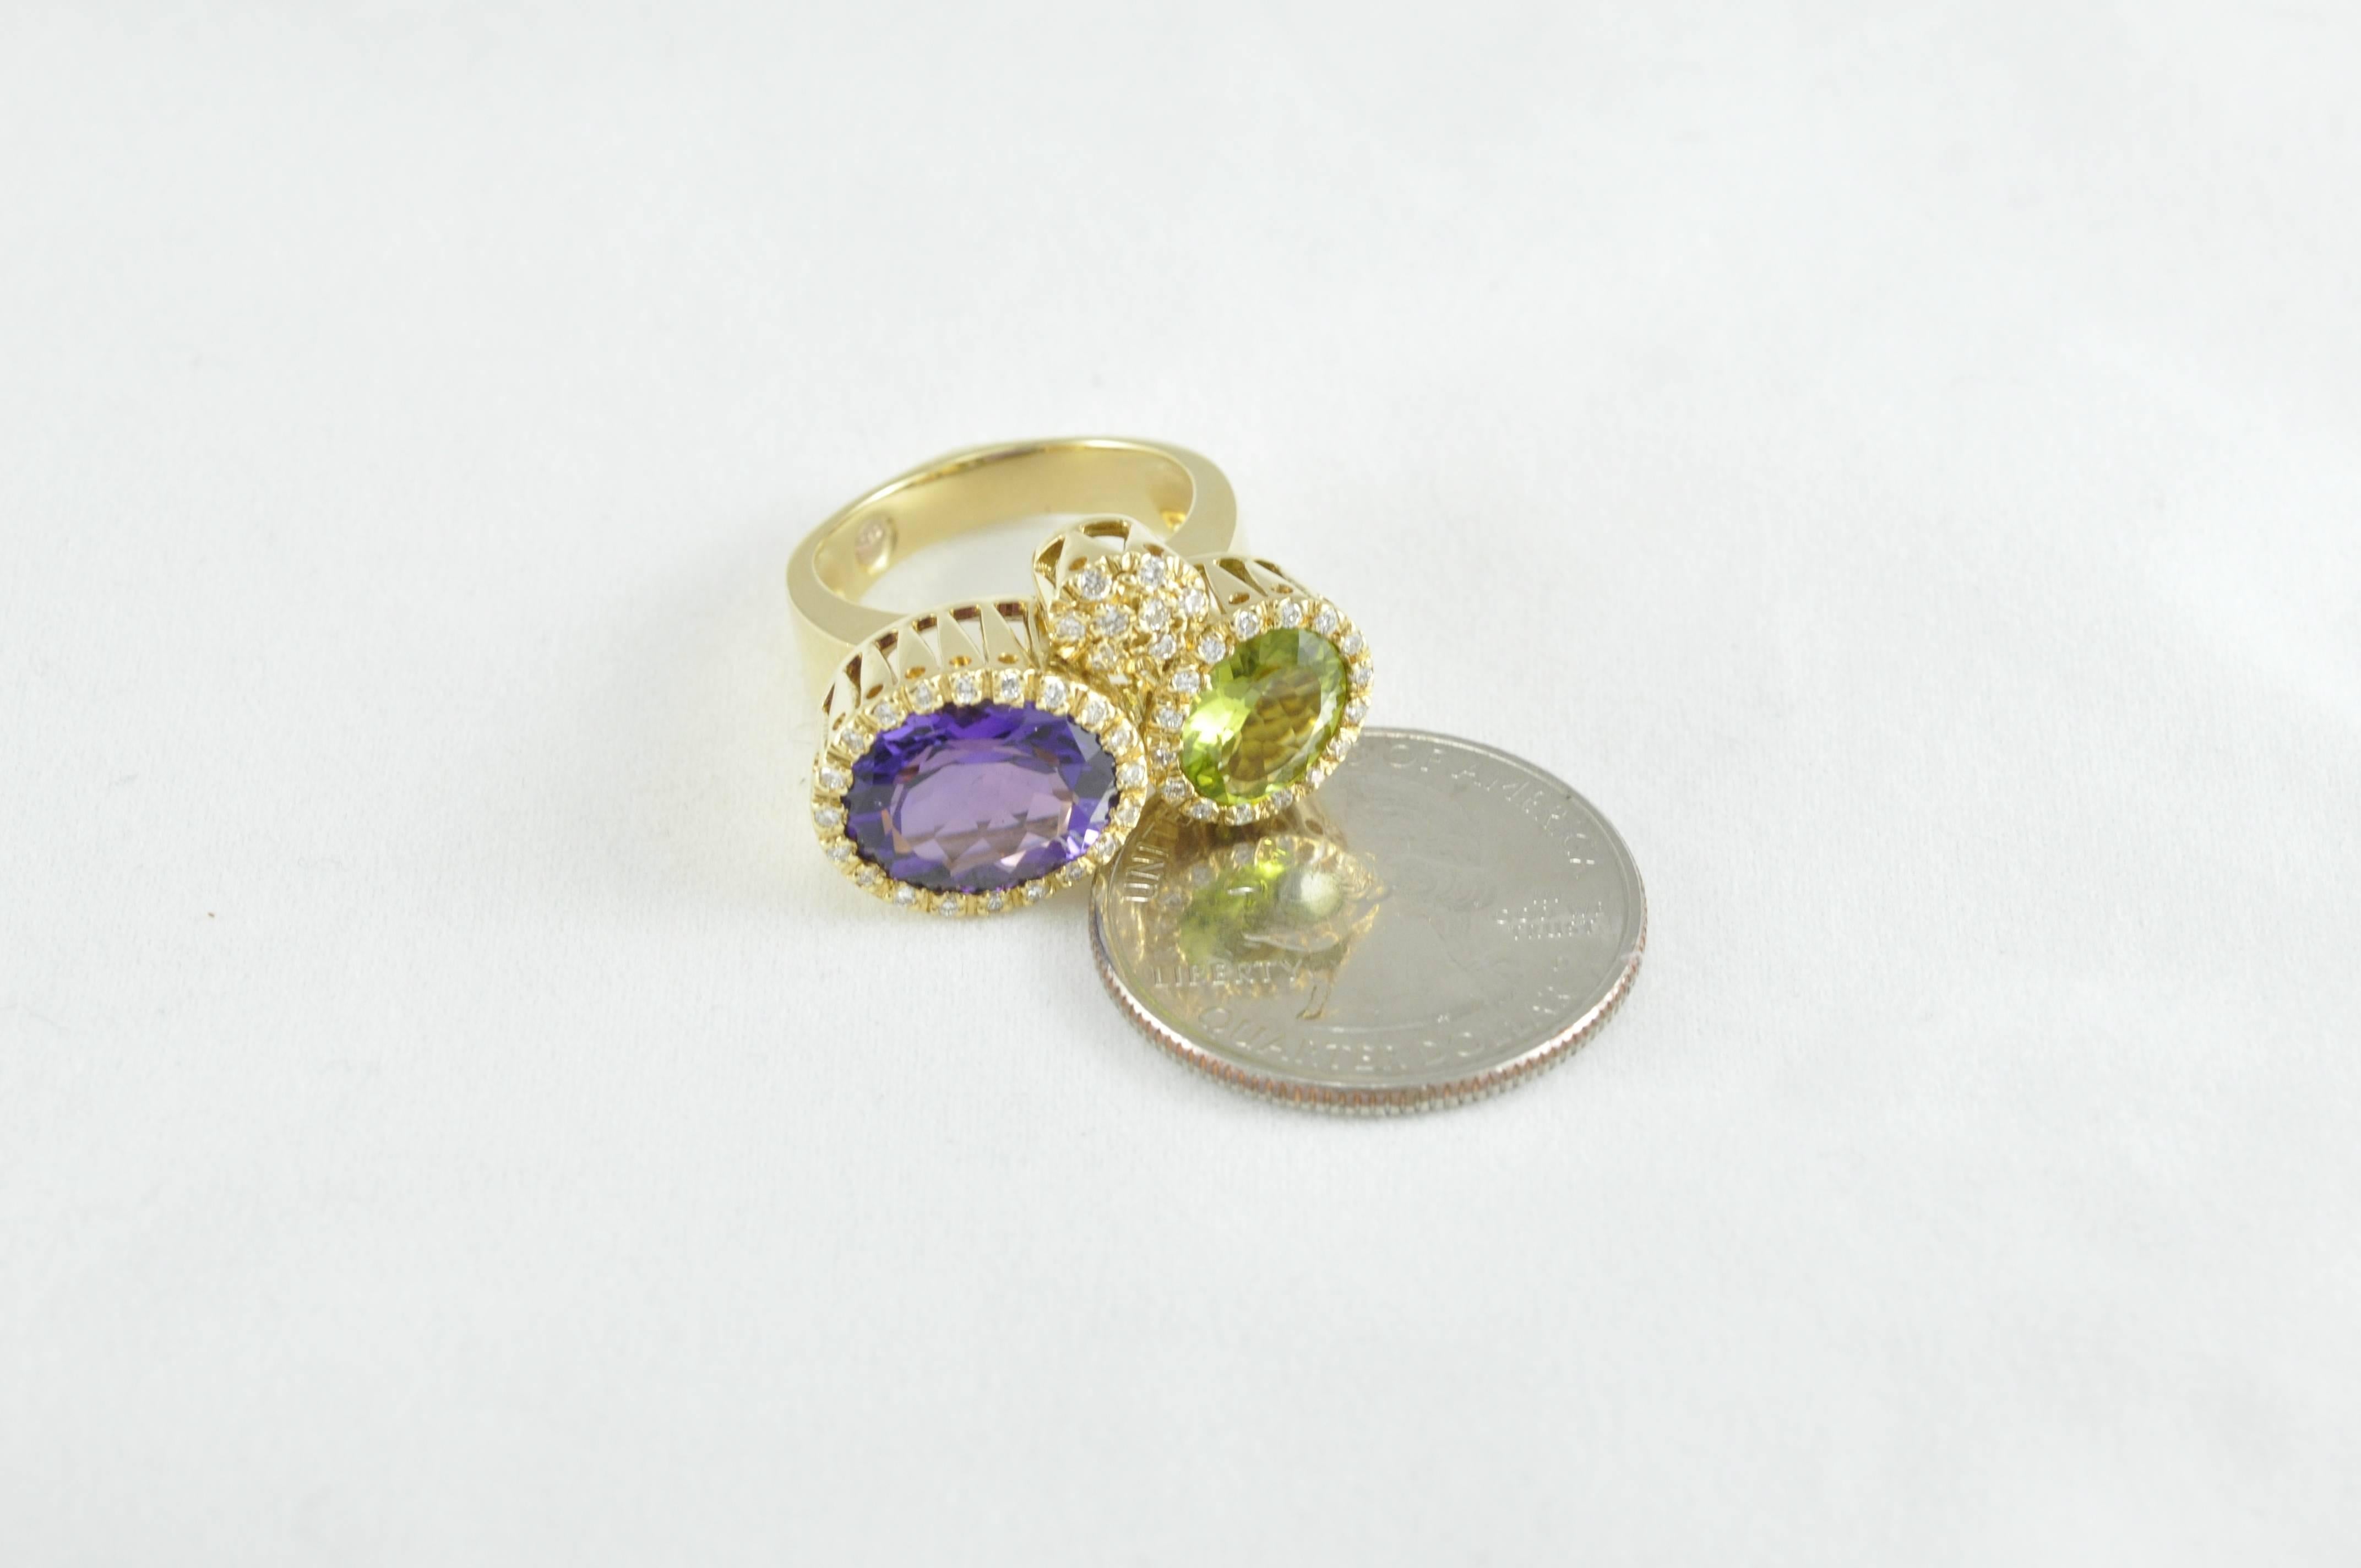 Oval Cut Ponte Vecchio Giollei Peridot, Amethyst and Diamond Ring